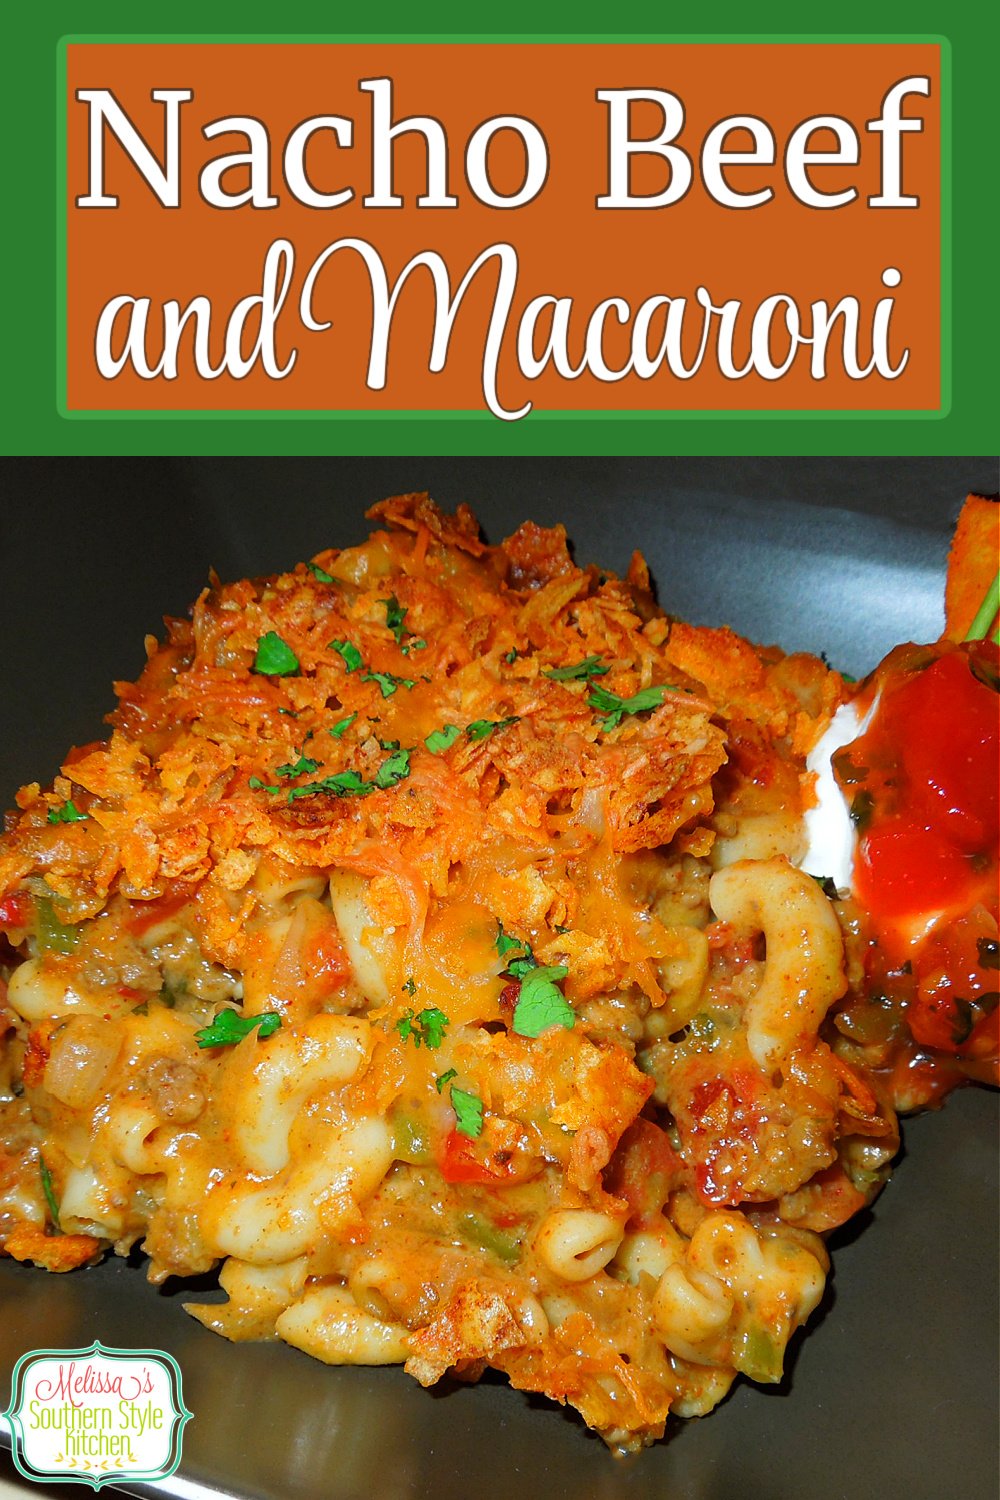 South of the border inspired Nacho Beef and Macaroni #nachobeef #macaroniandcheese #nachocheese #beefandmacaroni #macaronicasserole #pasta #casseroles #southernfood #southernrecipes #Mexicaninspired via @melissasssk